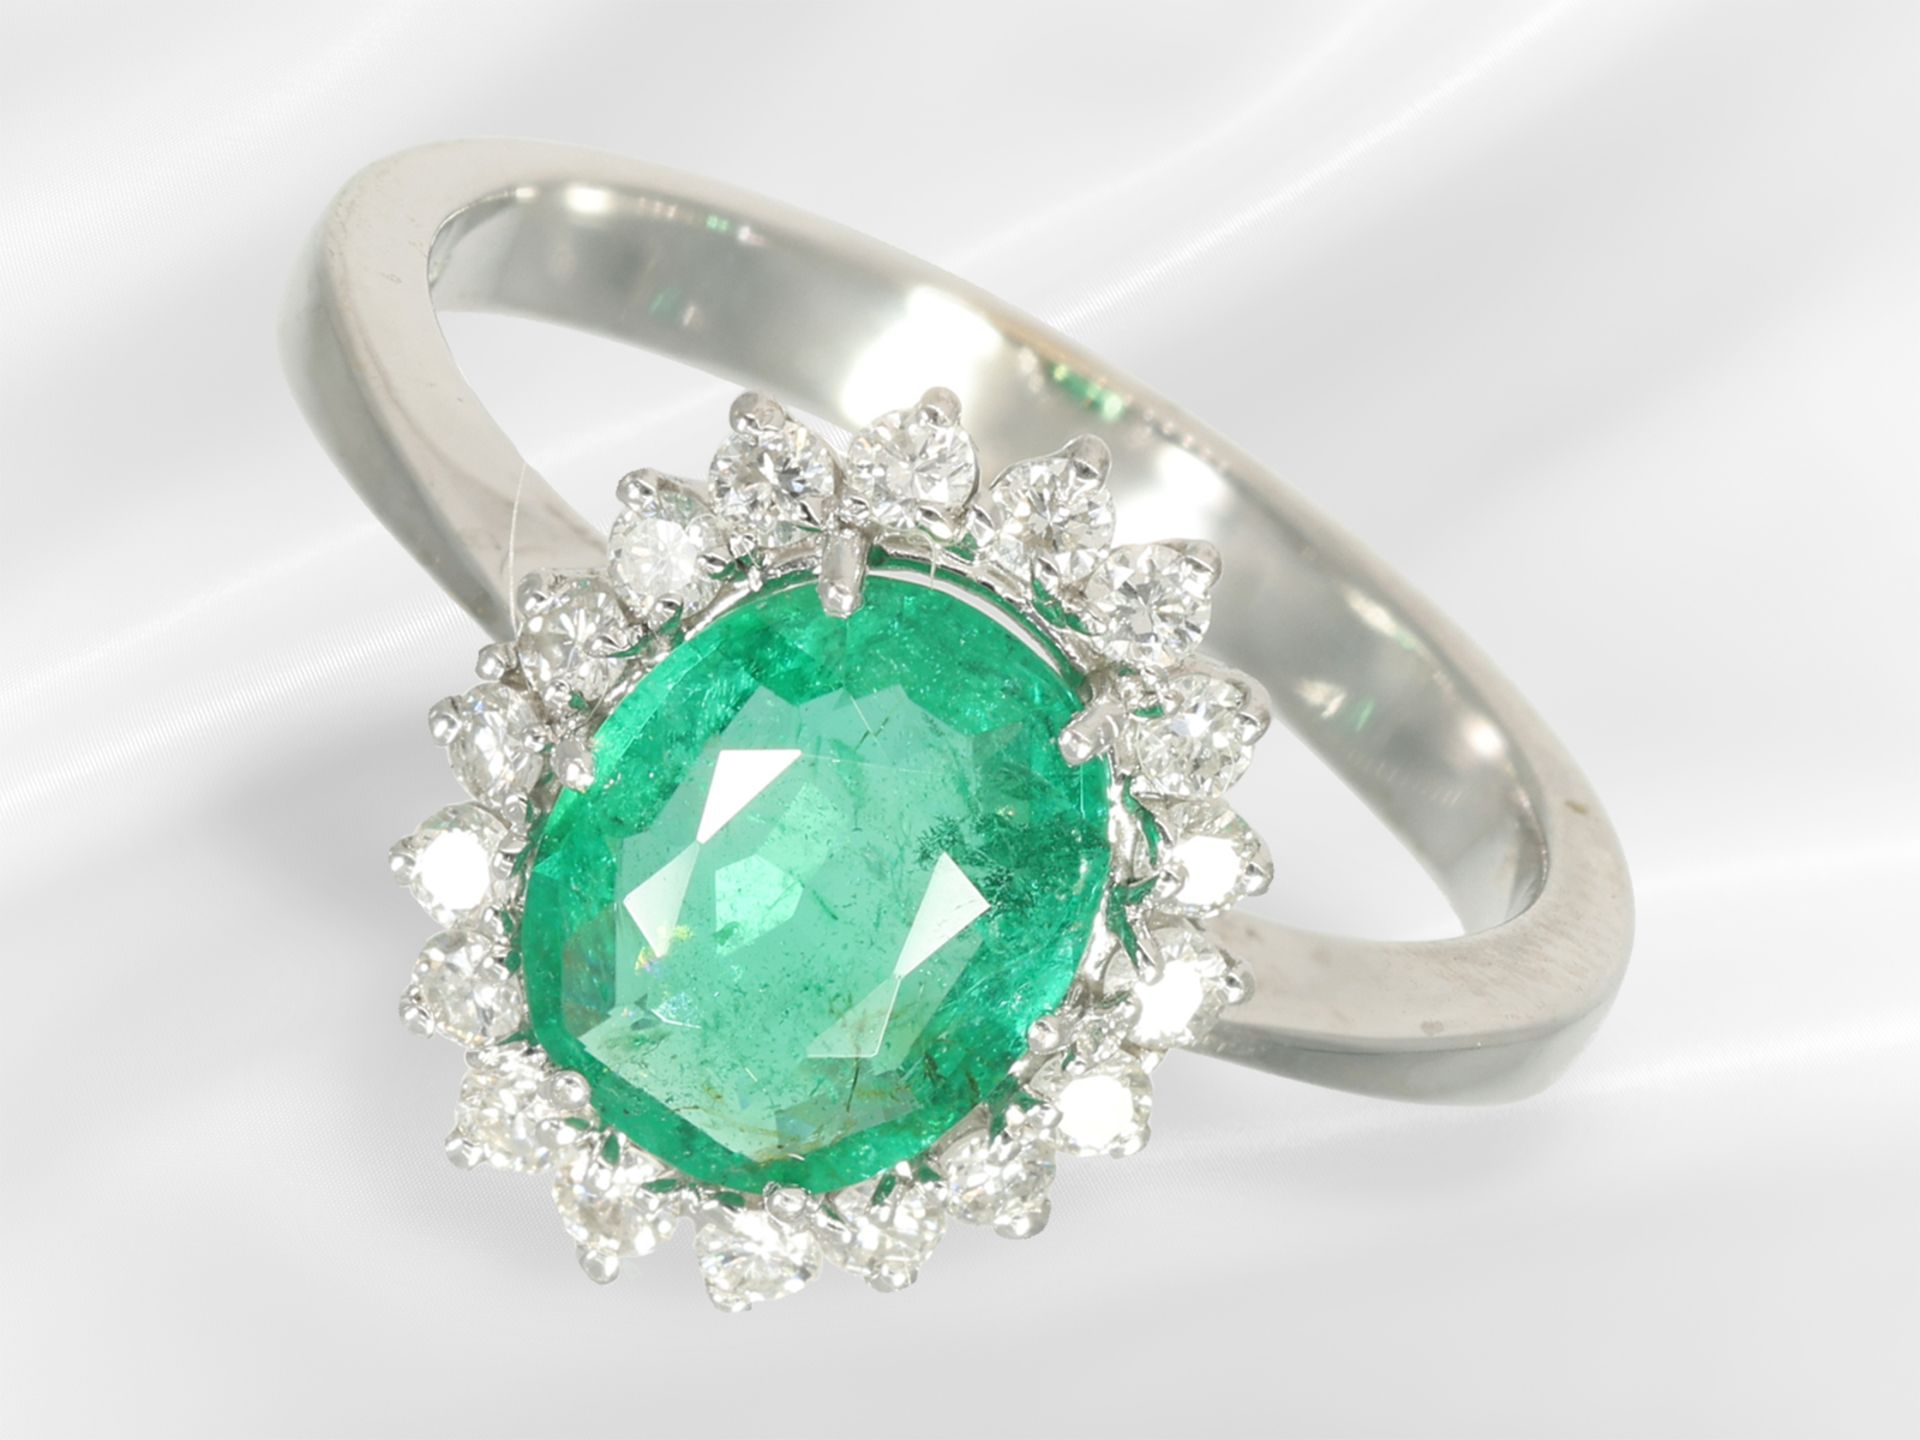 Ring: high-quality, formerly very expensive emerald/brilliant-cut diamond ring from Wempe, approx. 1